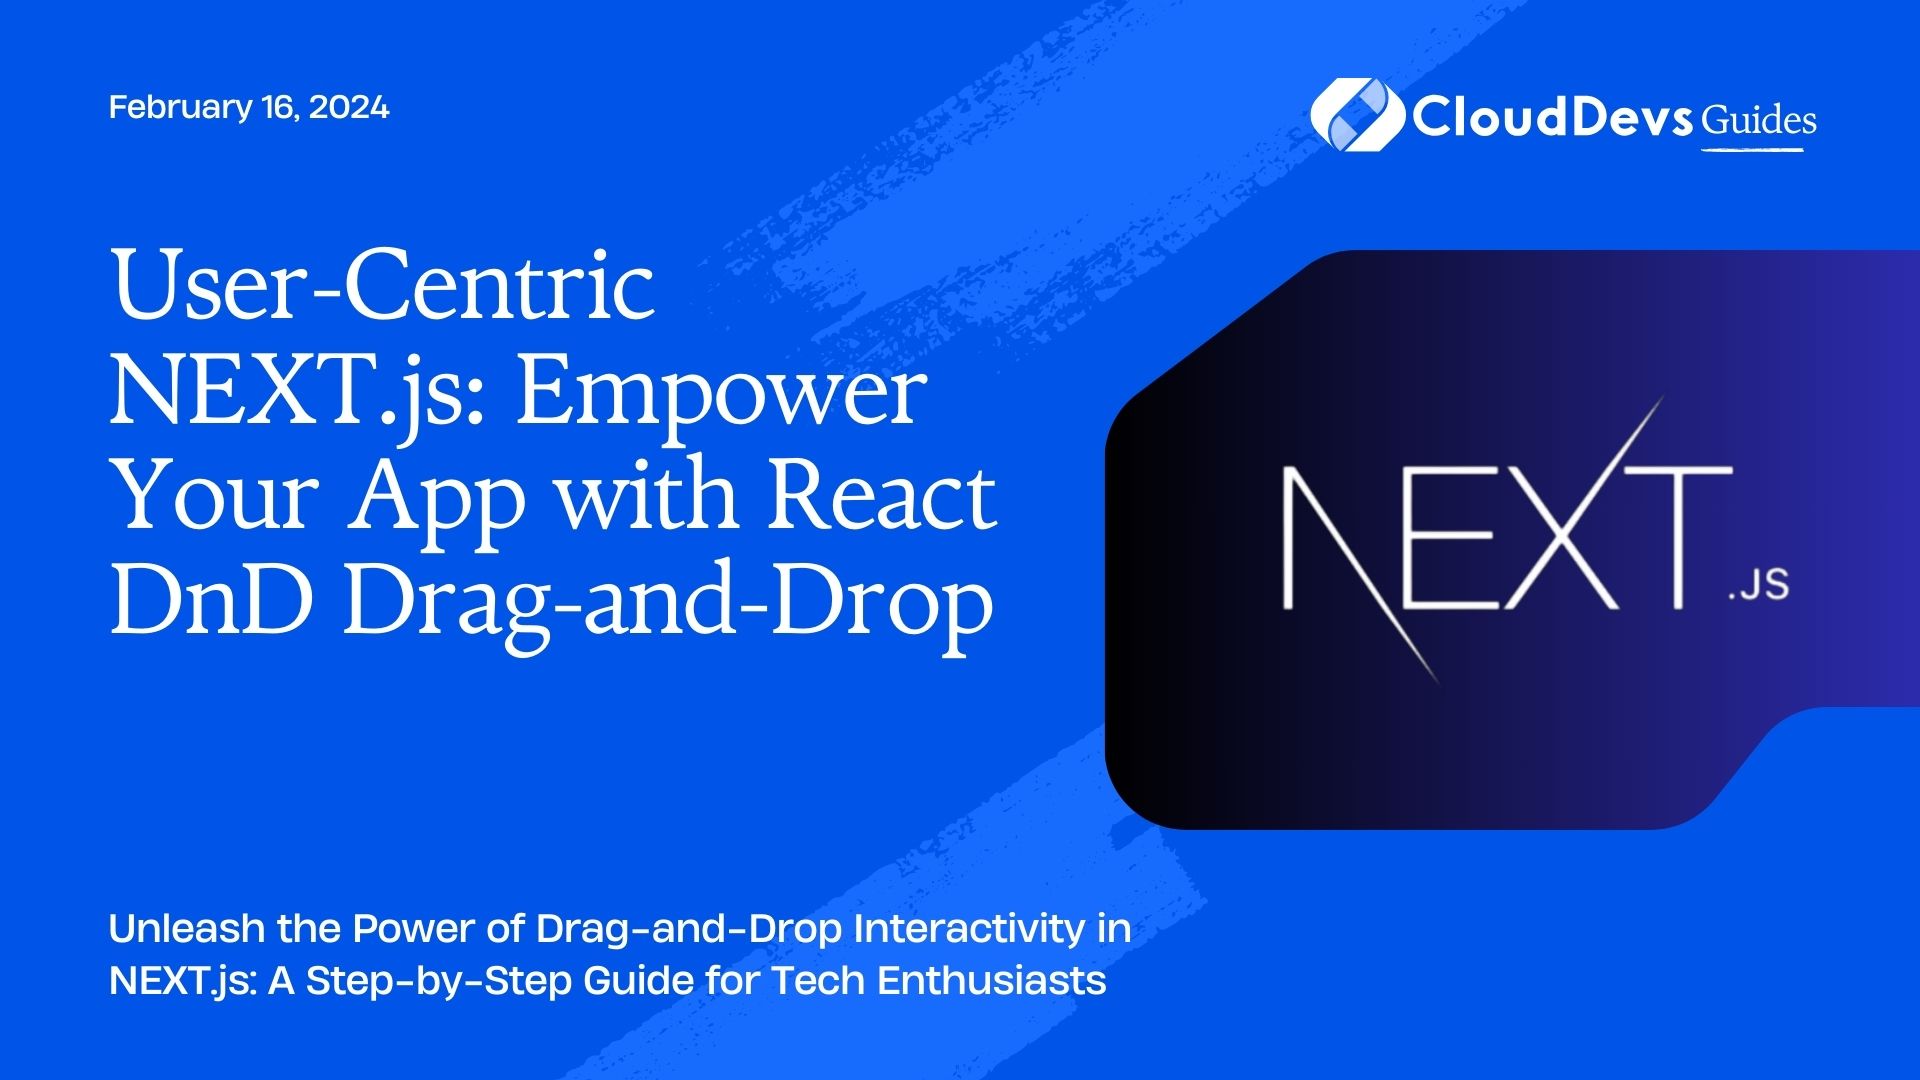 User-Centric NEXT.js: Empower Your App with React DnD Drag-and-Drop